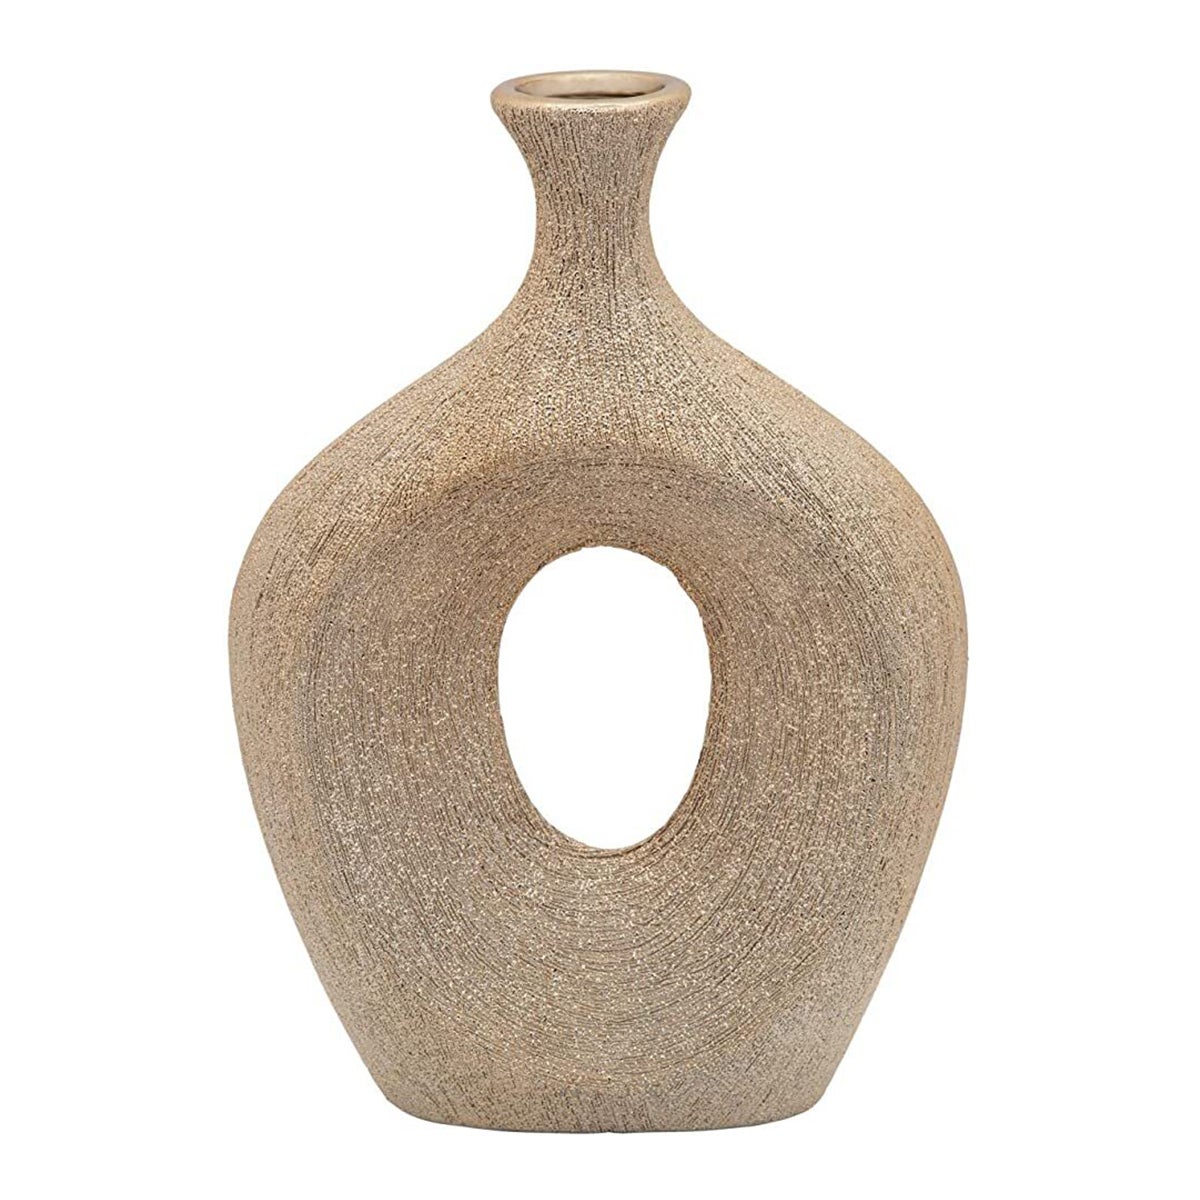 Kelly Wearstler Unearthed Actually Chic Stoneware on Amazon for Under $50